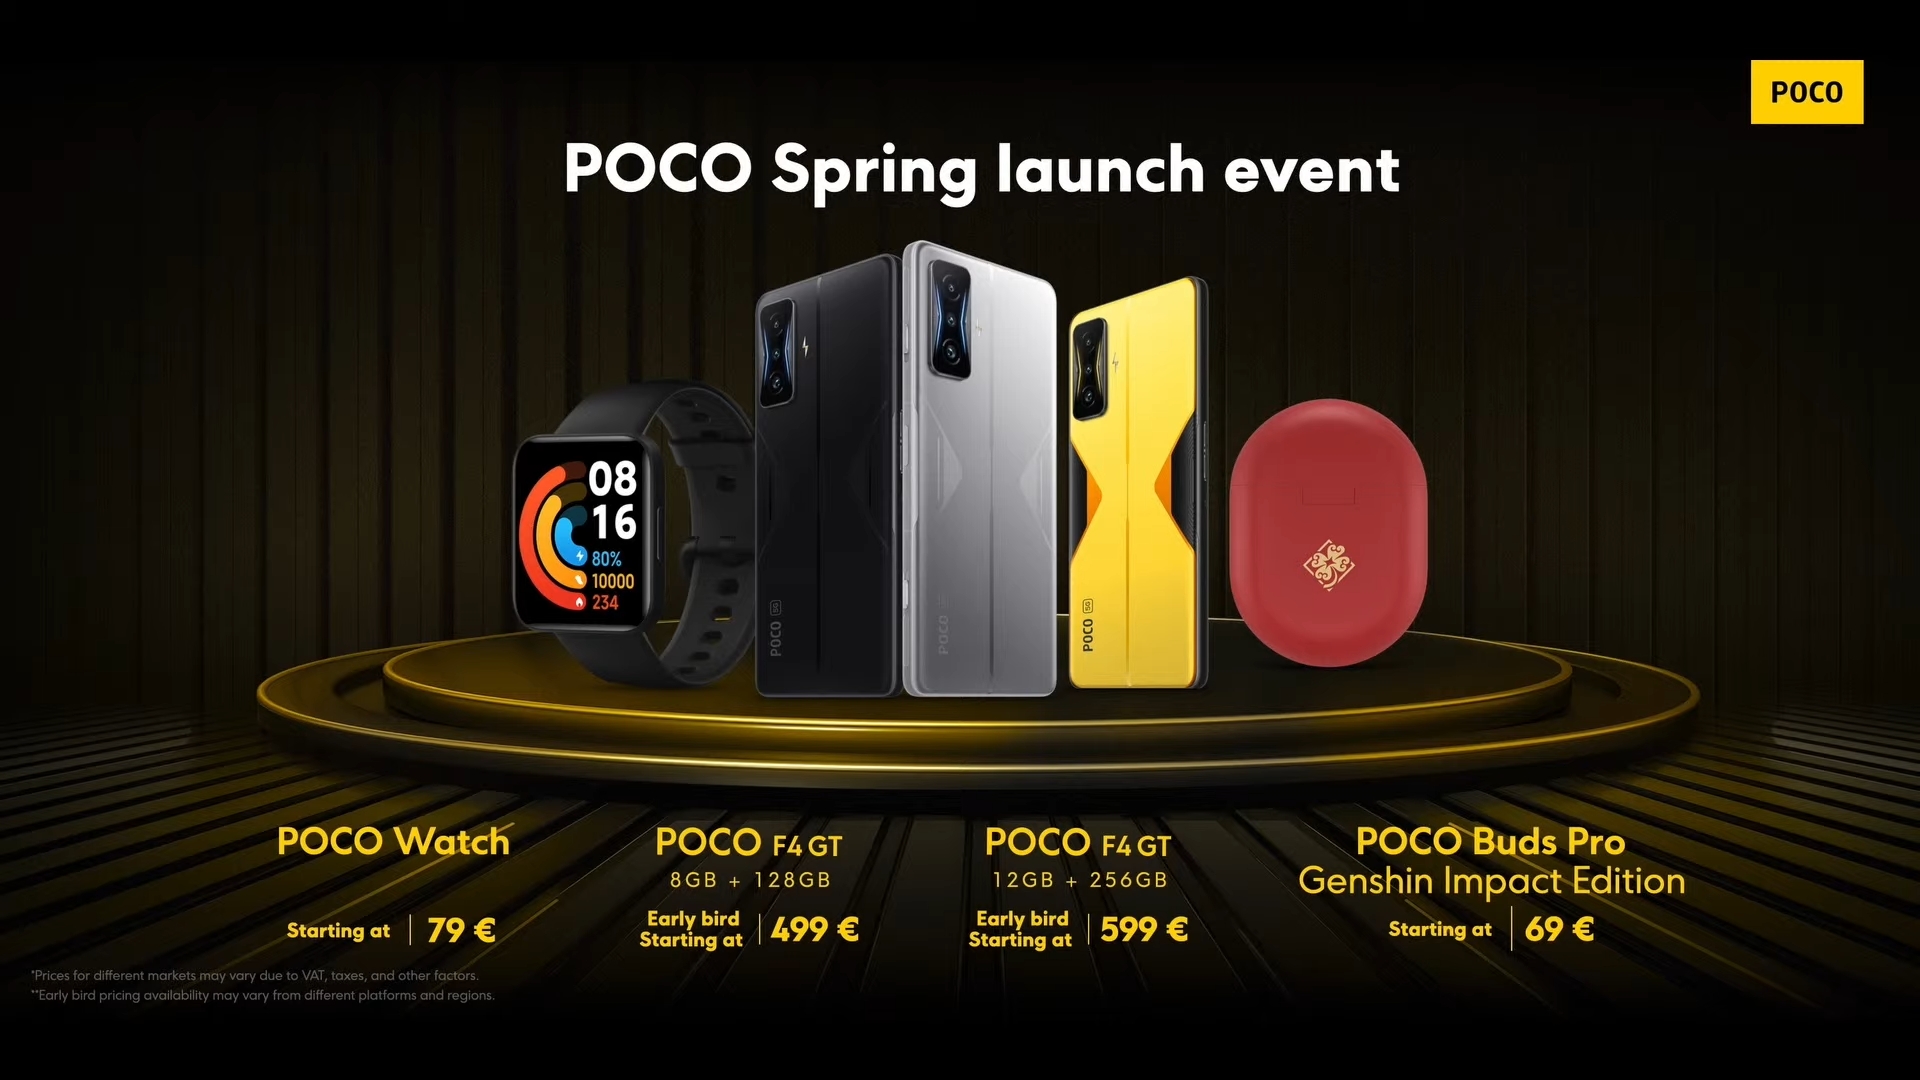 POCO F4 5G Launch  Global Debut 